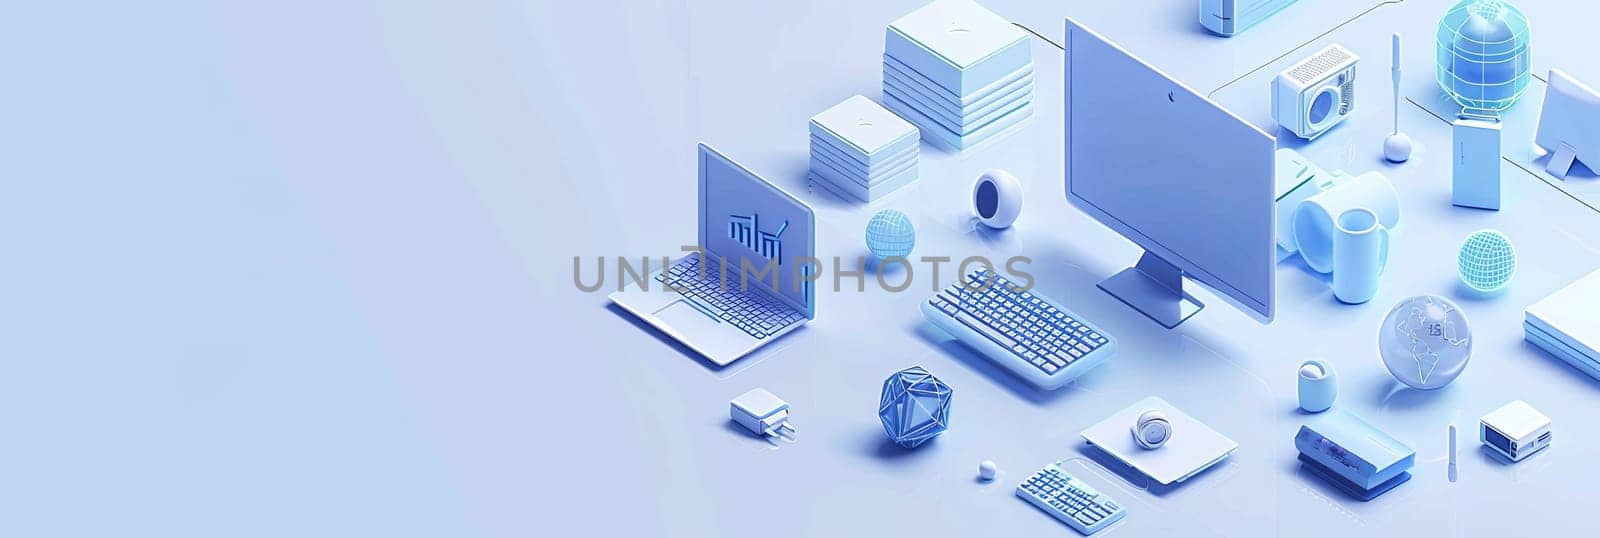 Isometric icon of a blue and white laptop, ideal for computer services, tech repairs, or cloud storage promotions.